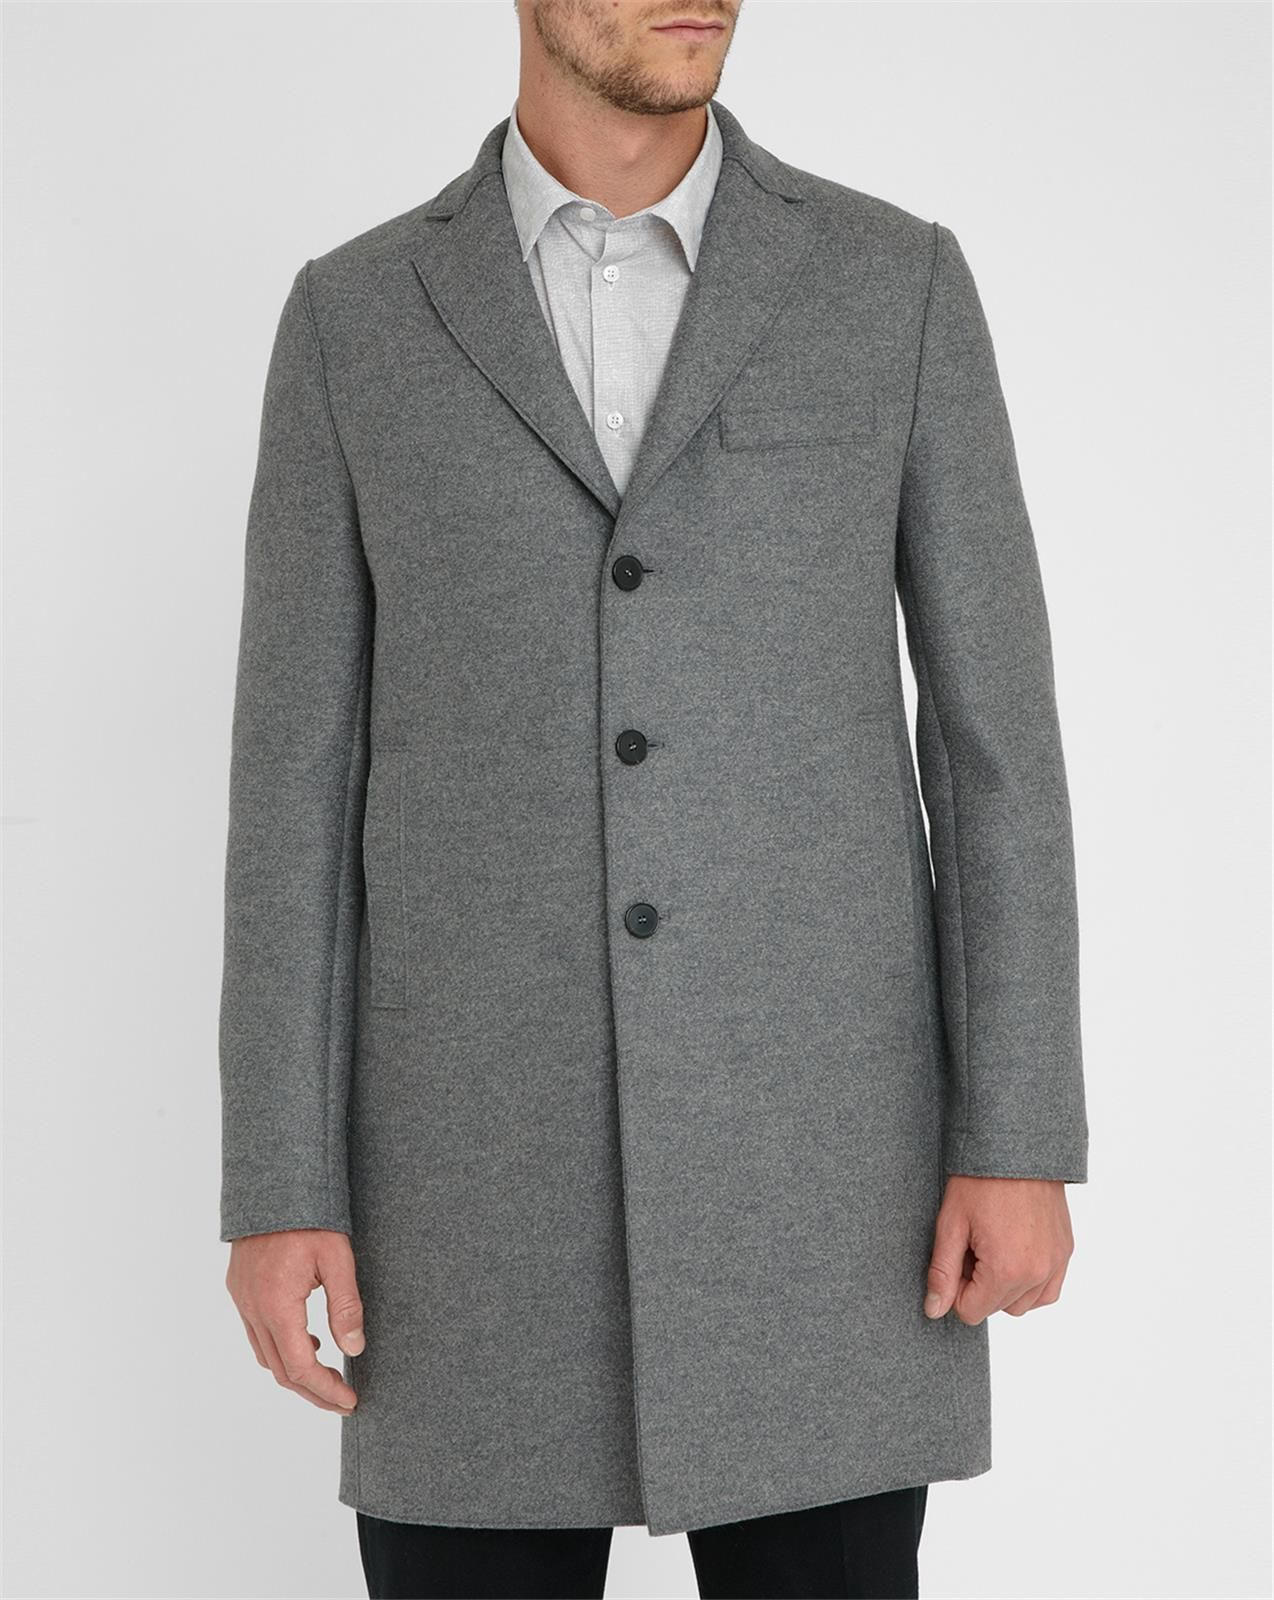 Harris Wharf London Grey Unstructured Boxy Boiled Wool Unlined Coat in